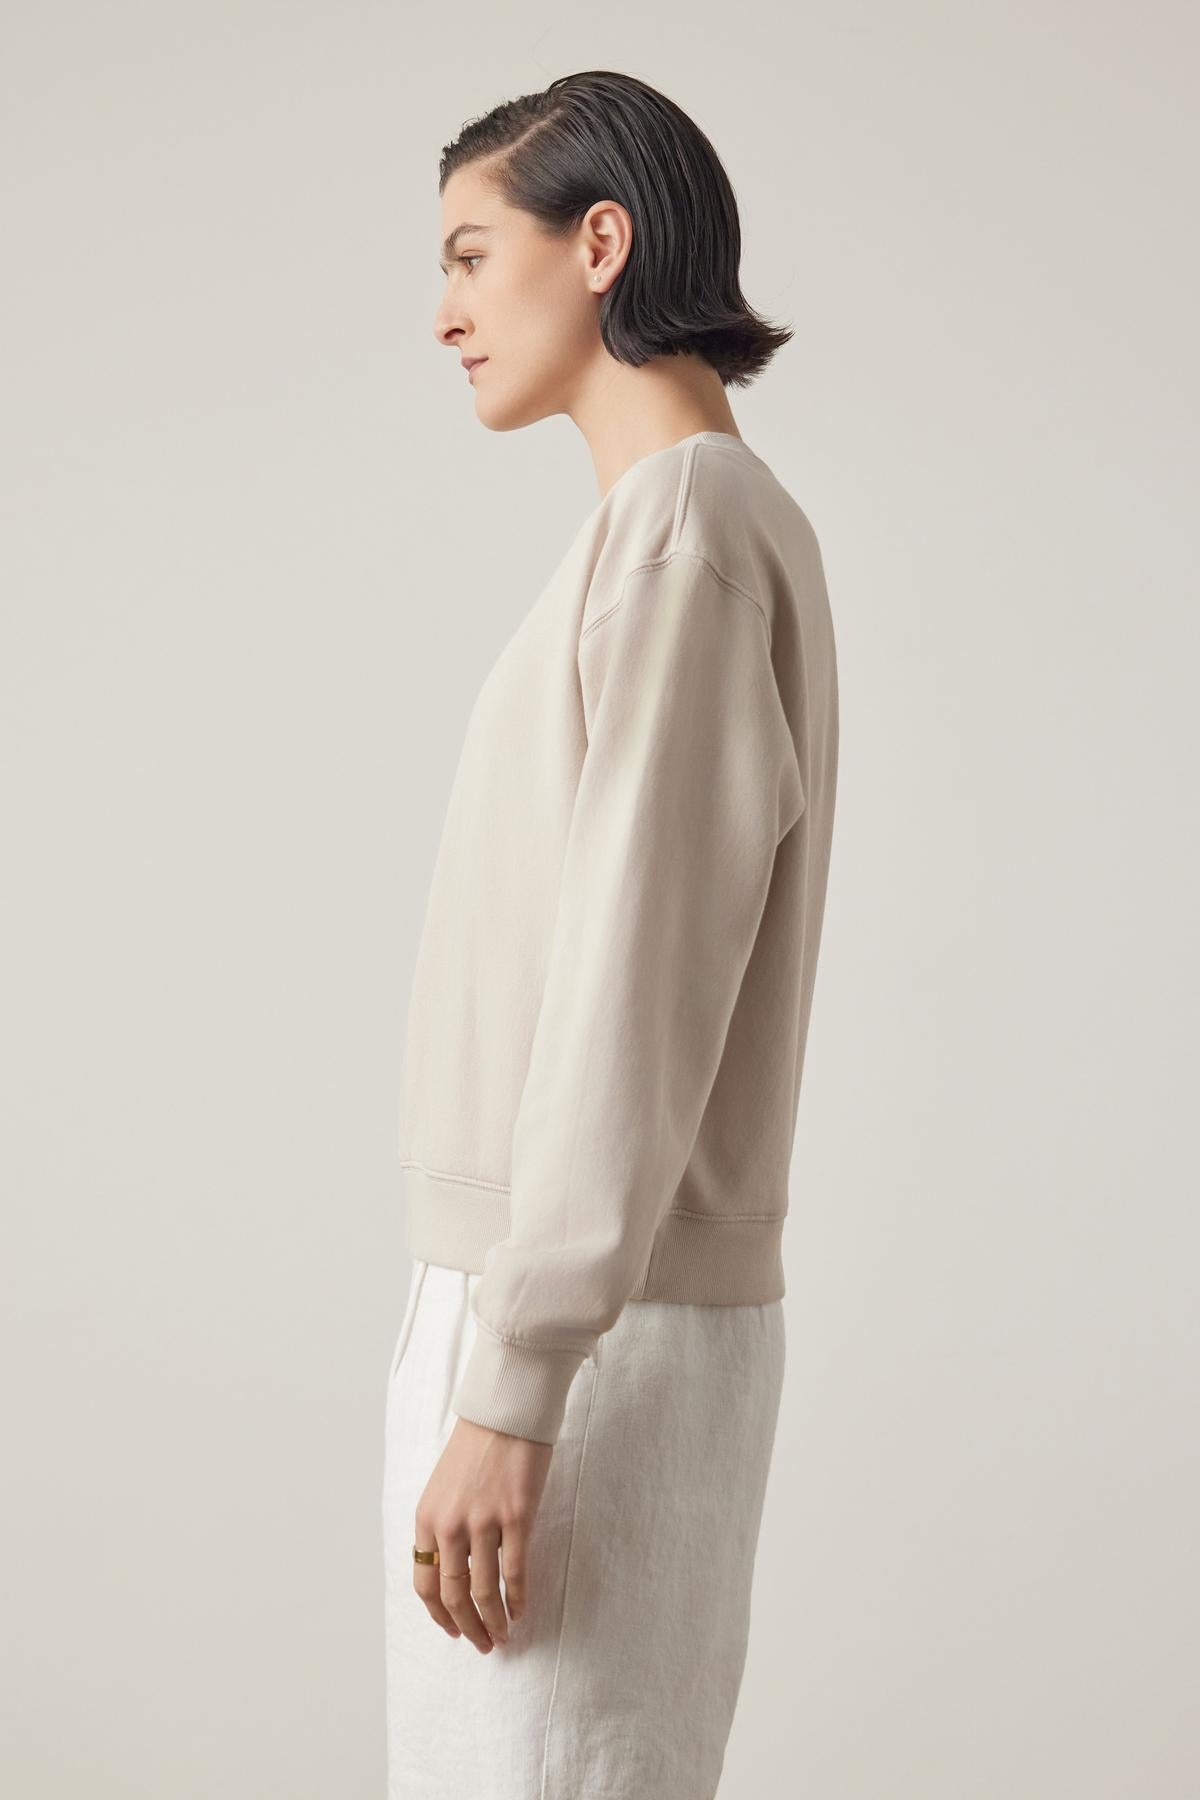   Profile view of a person with slicked-back hair wearing a beige YNEZ SWEATSHIRT by Velvet by Jenny Graham and white pants against a light background. 